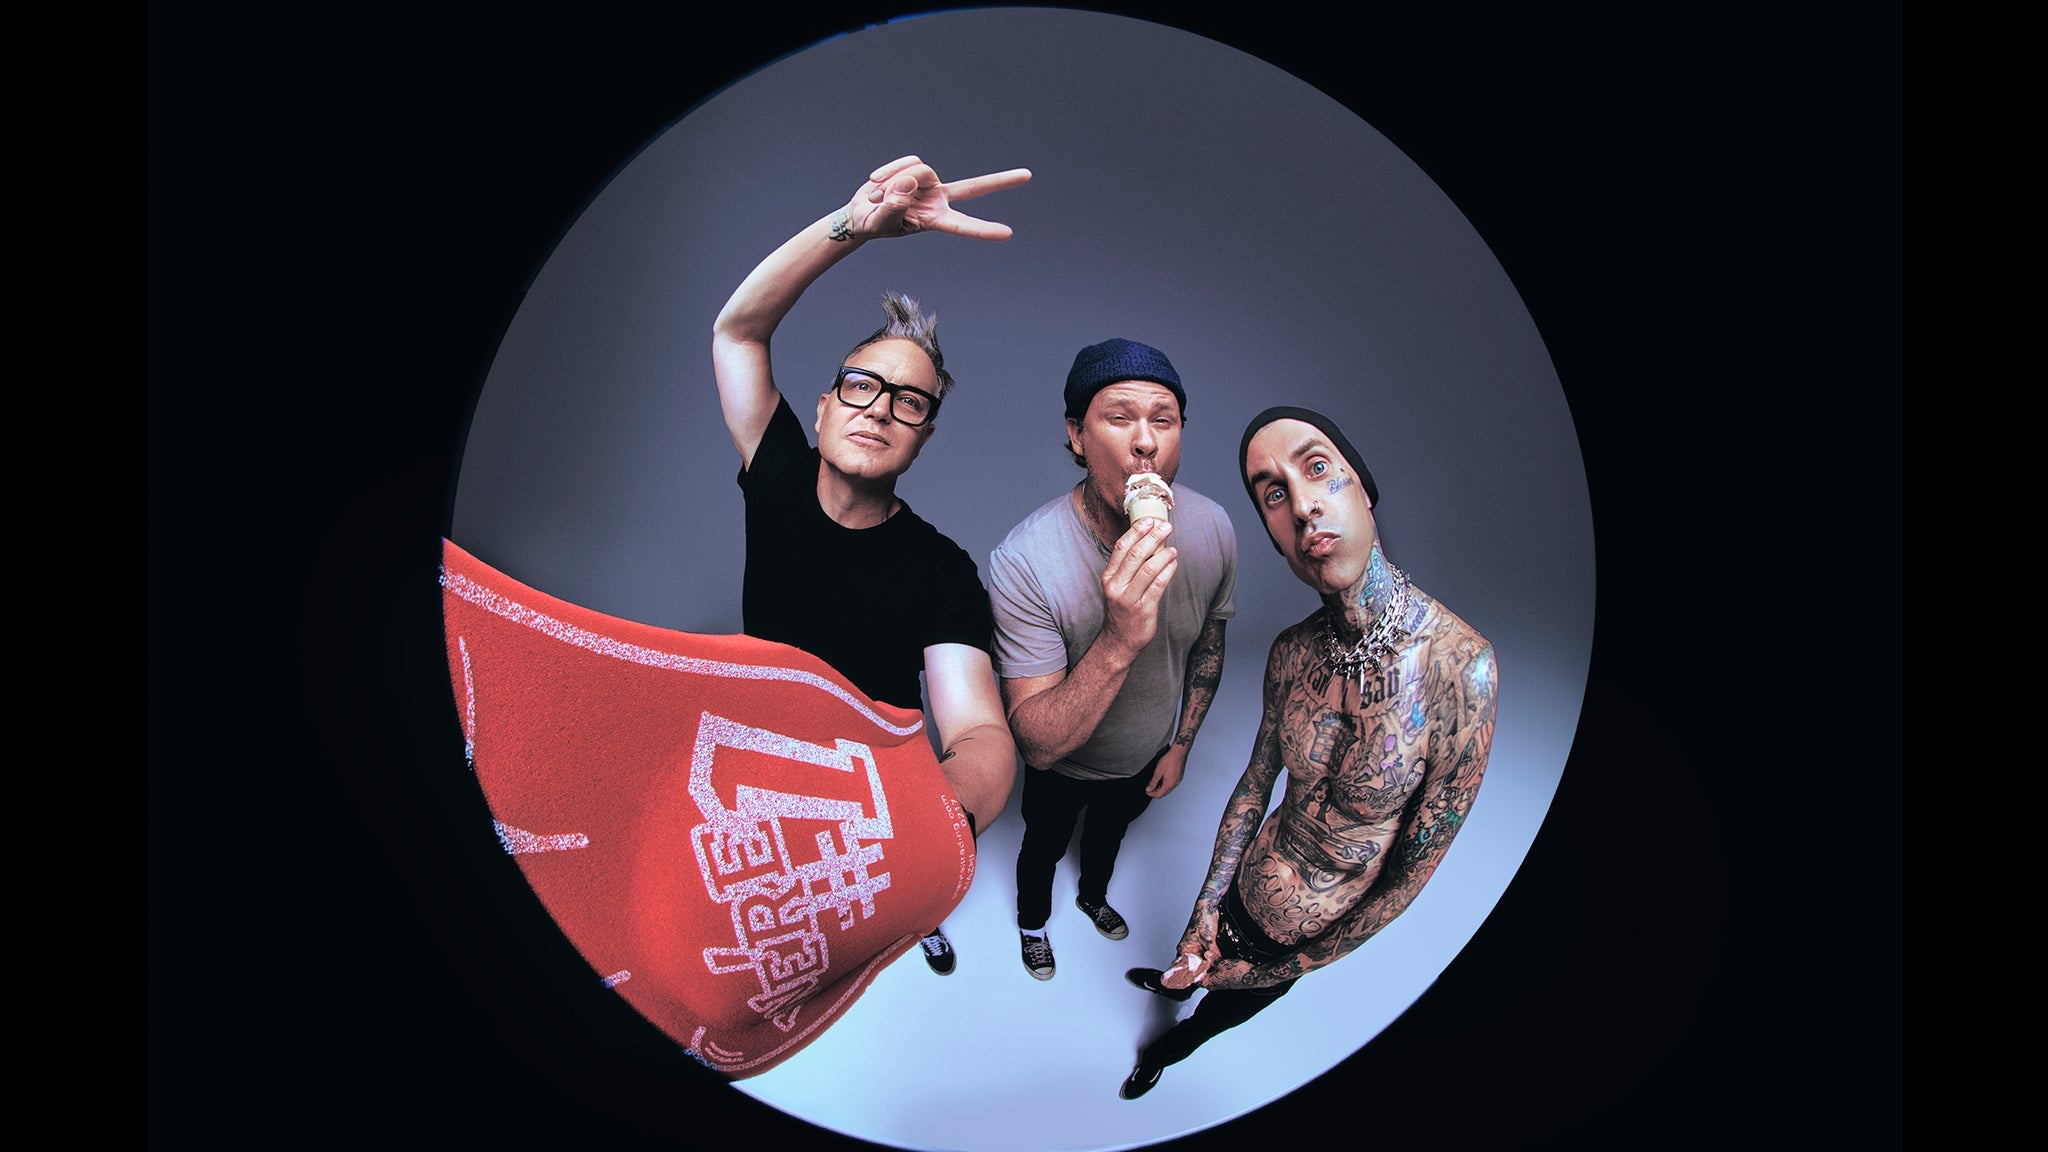 members only presale password to blink-182 Tour 2023 face value tickets in Los Angeles